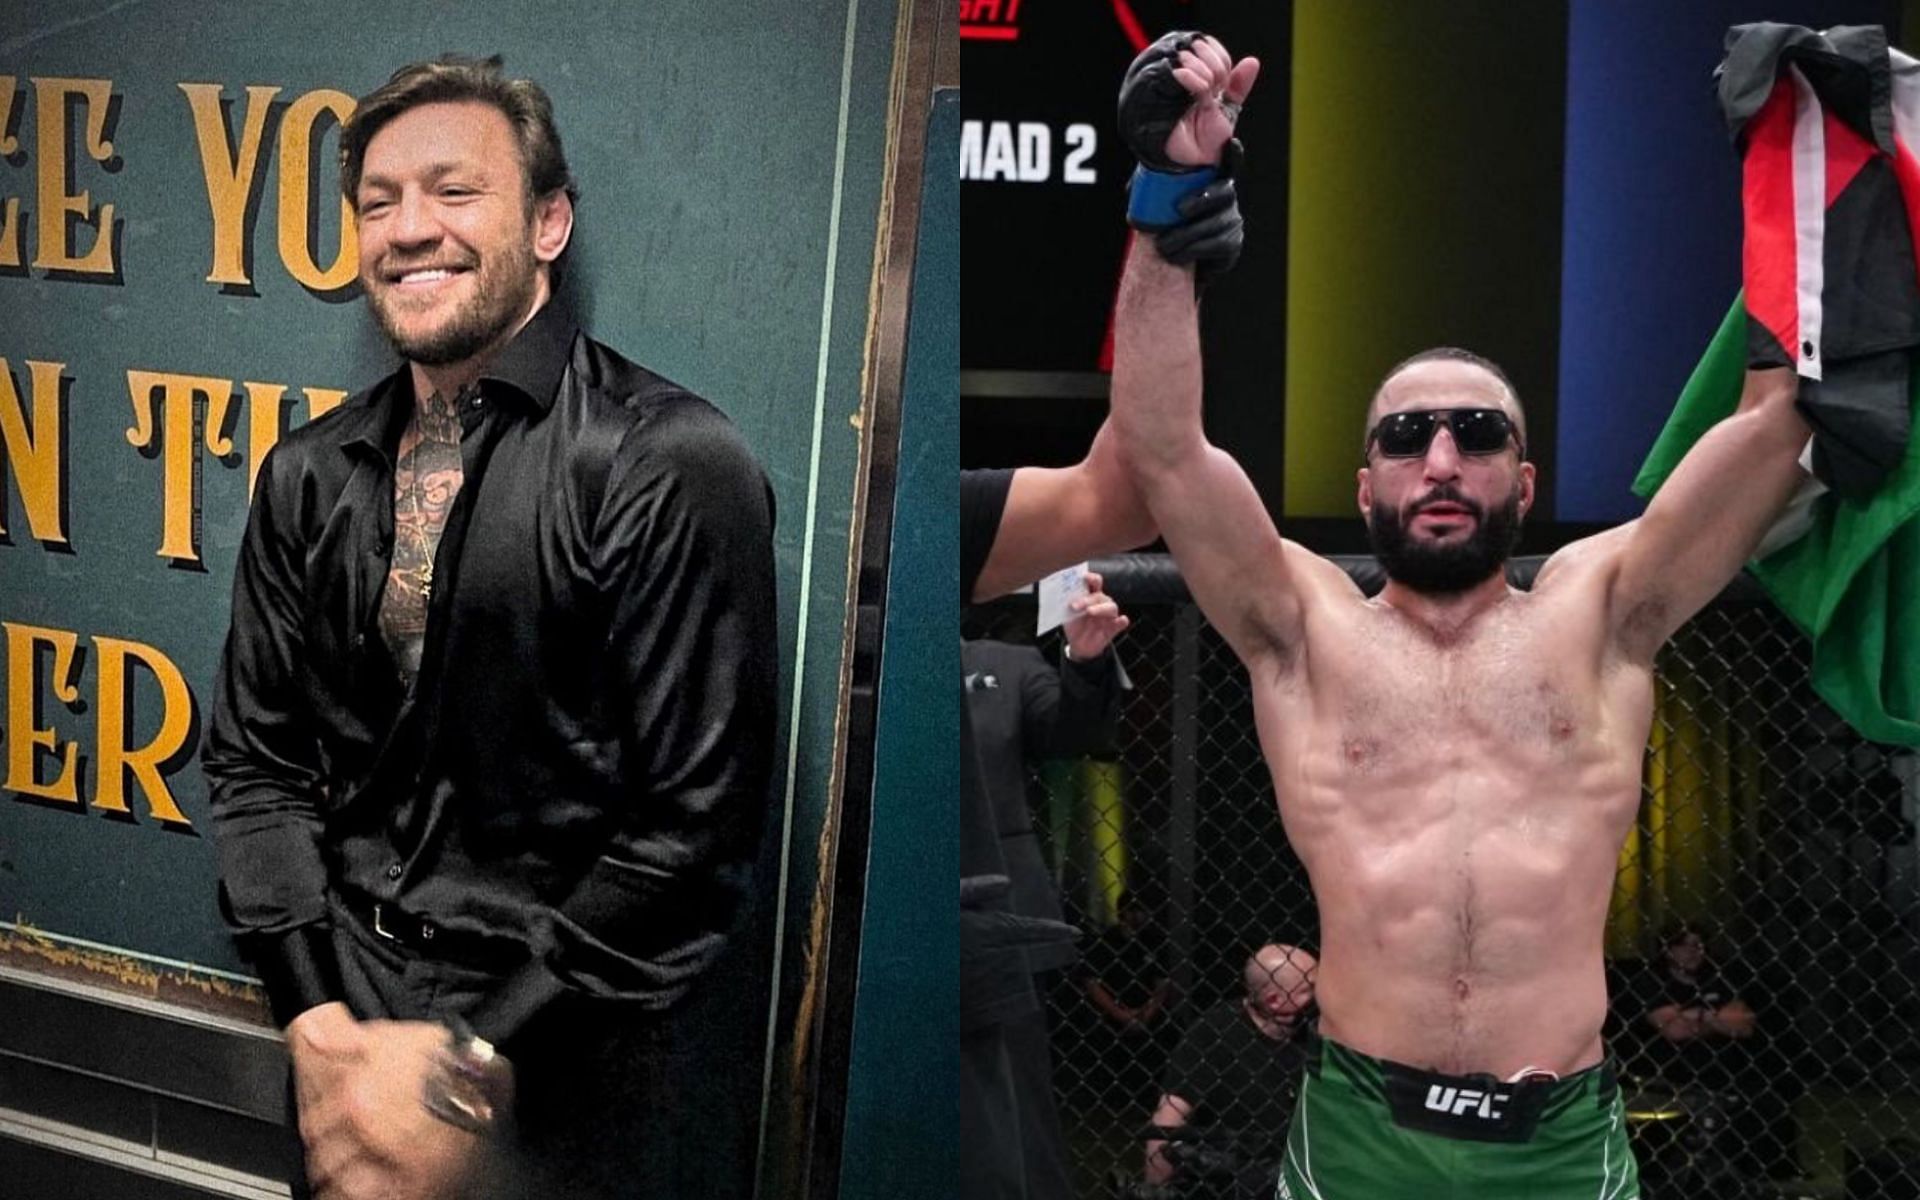 Conor McGregor (left) making fun of Belal Muhammad (right) at the UFC studio [Photo Courtesy @thenotoriousmma on Instagram and @bullyb170 on X]